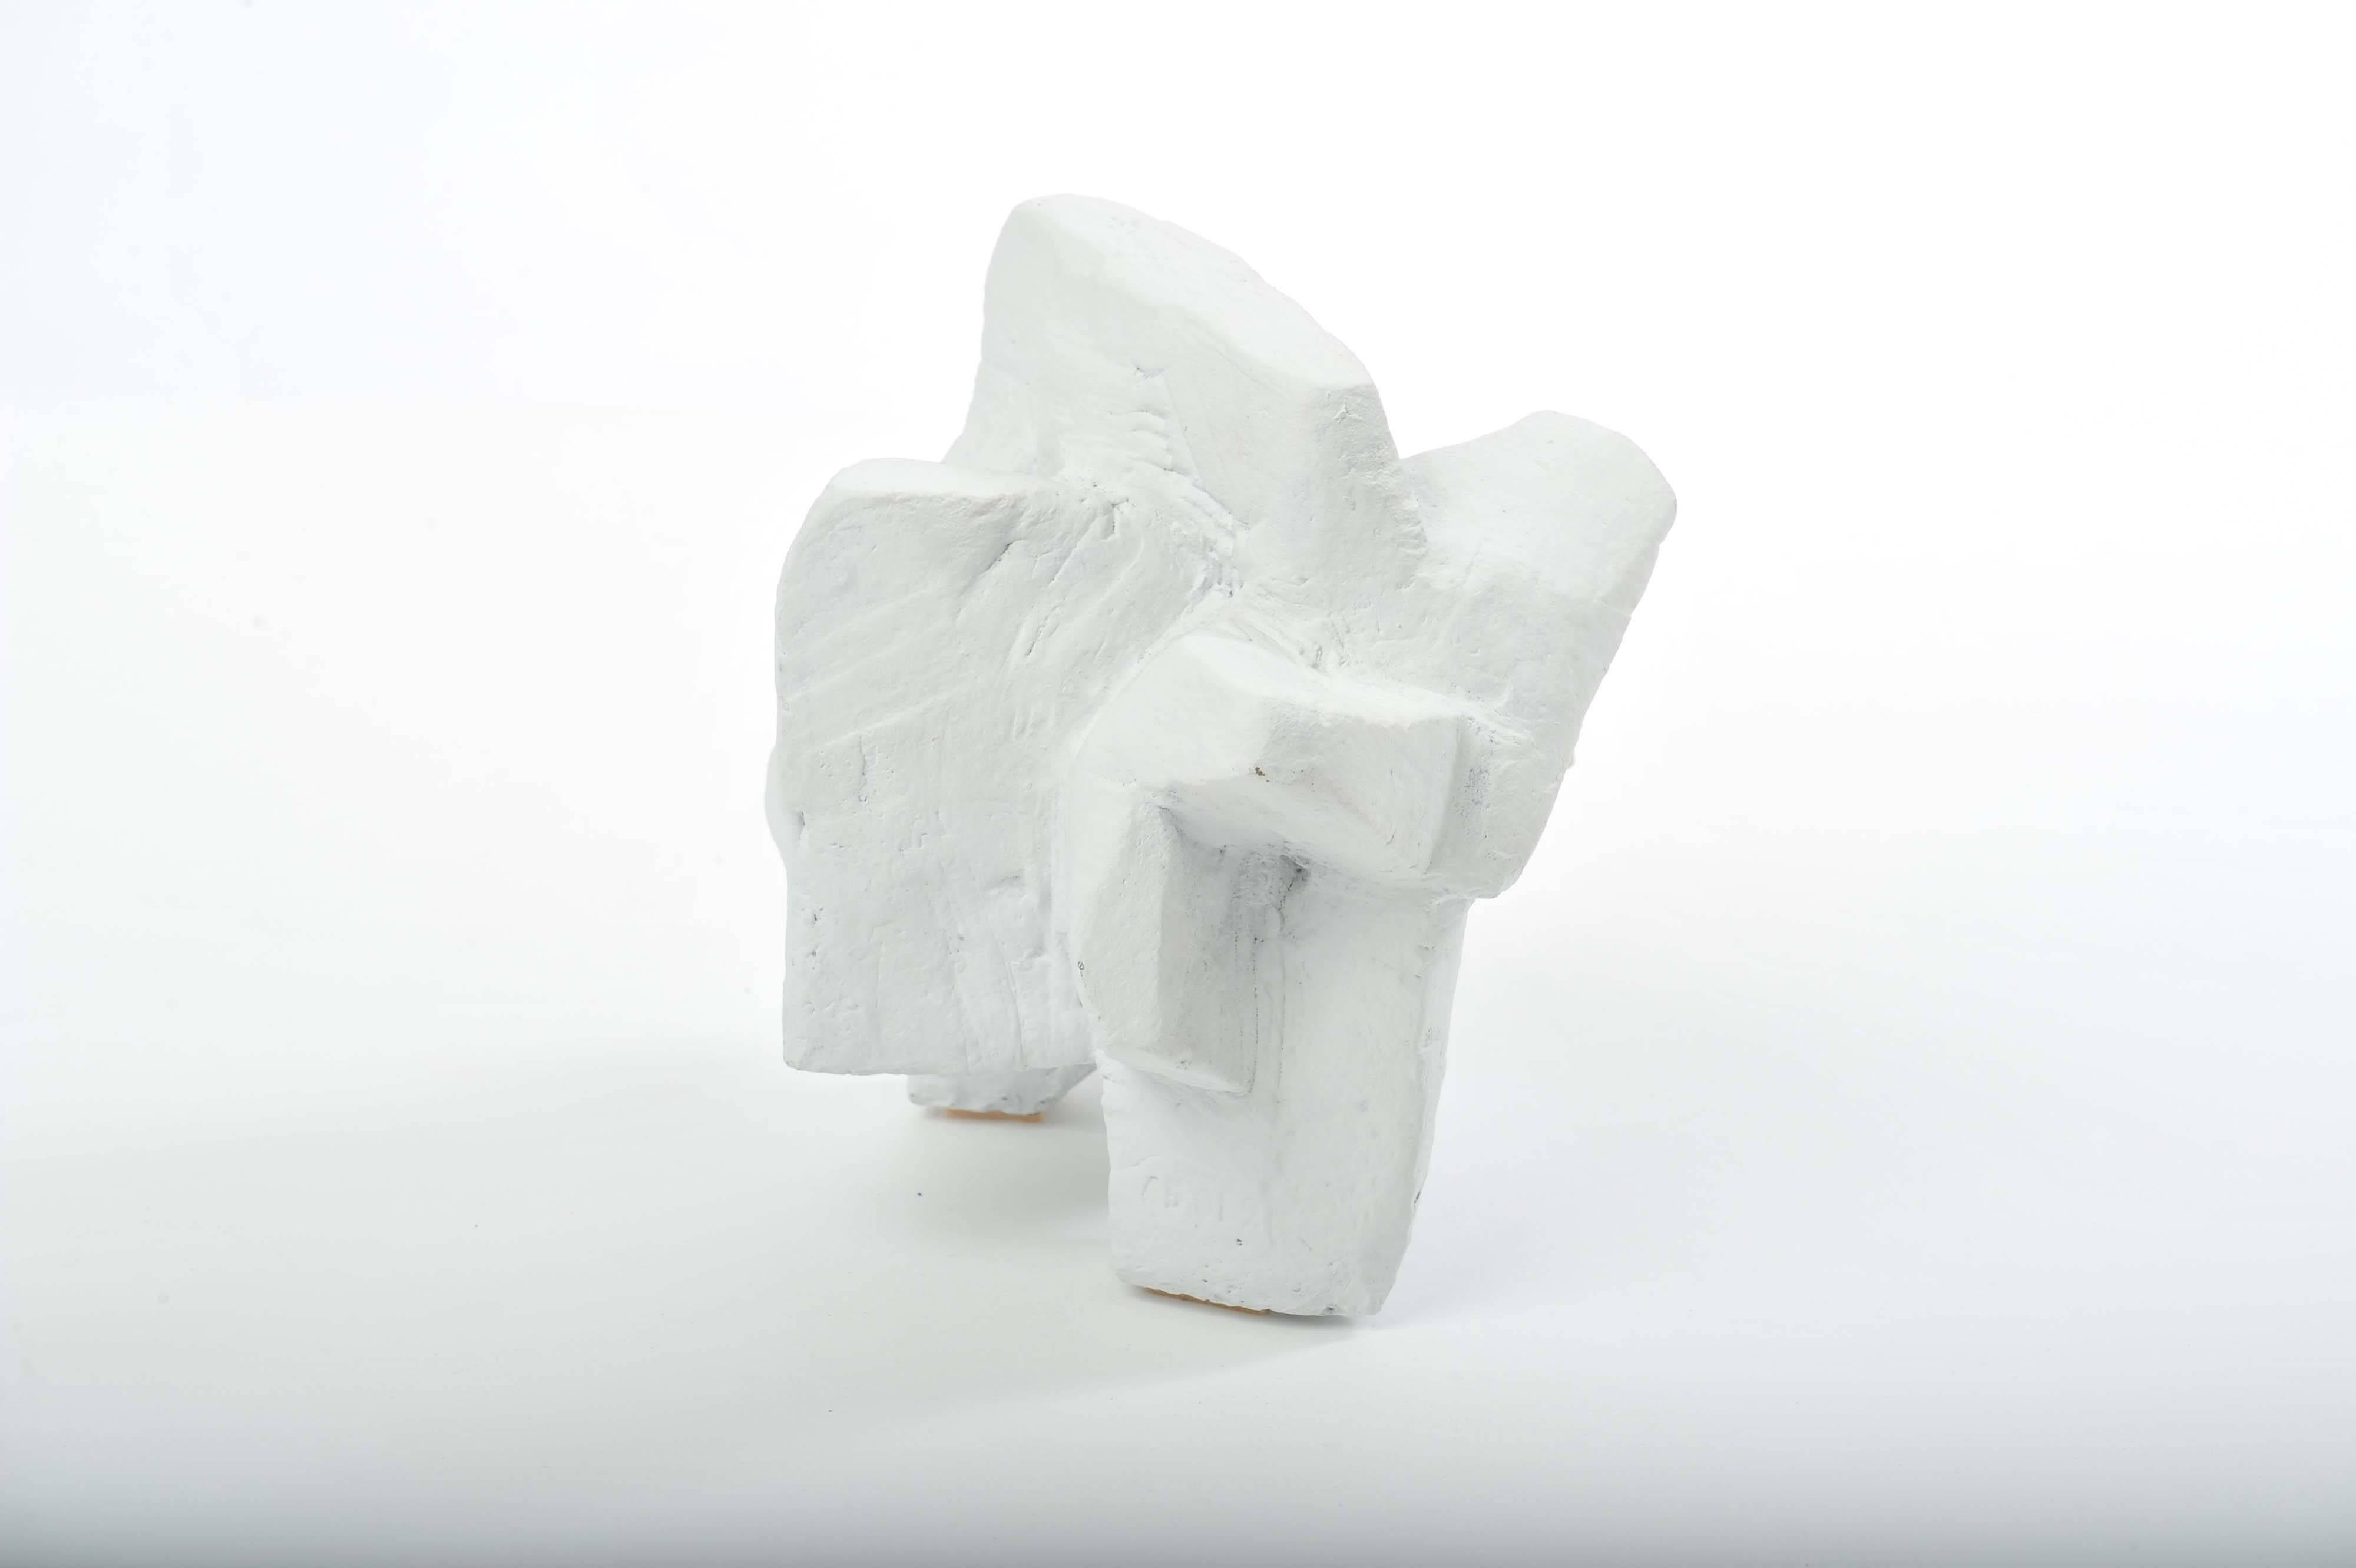 This hand formed ceramic sculpture looks like white cliffs on the British coast line. His work echoes a voyage of discovery in not just the visible natural world of trees, rocks but the city and Industrial landscape with his exploration of space and